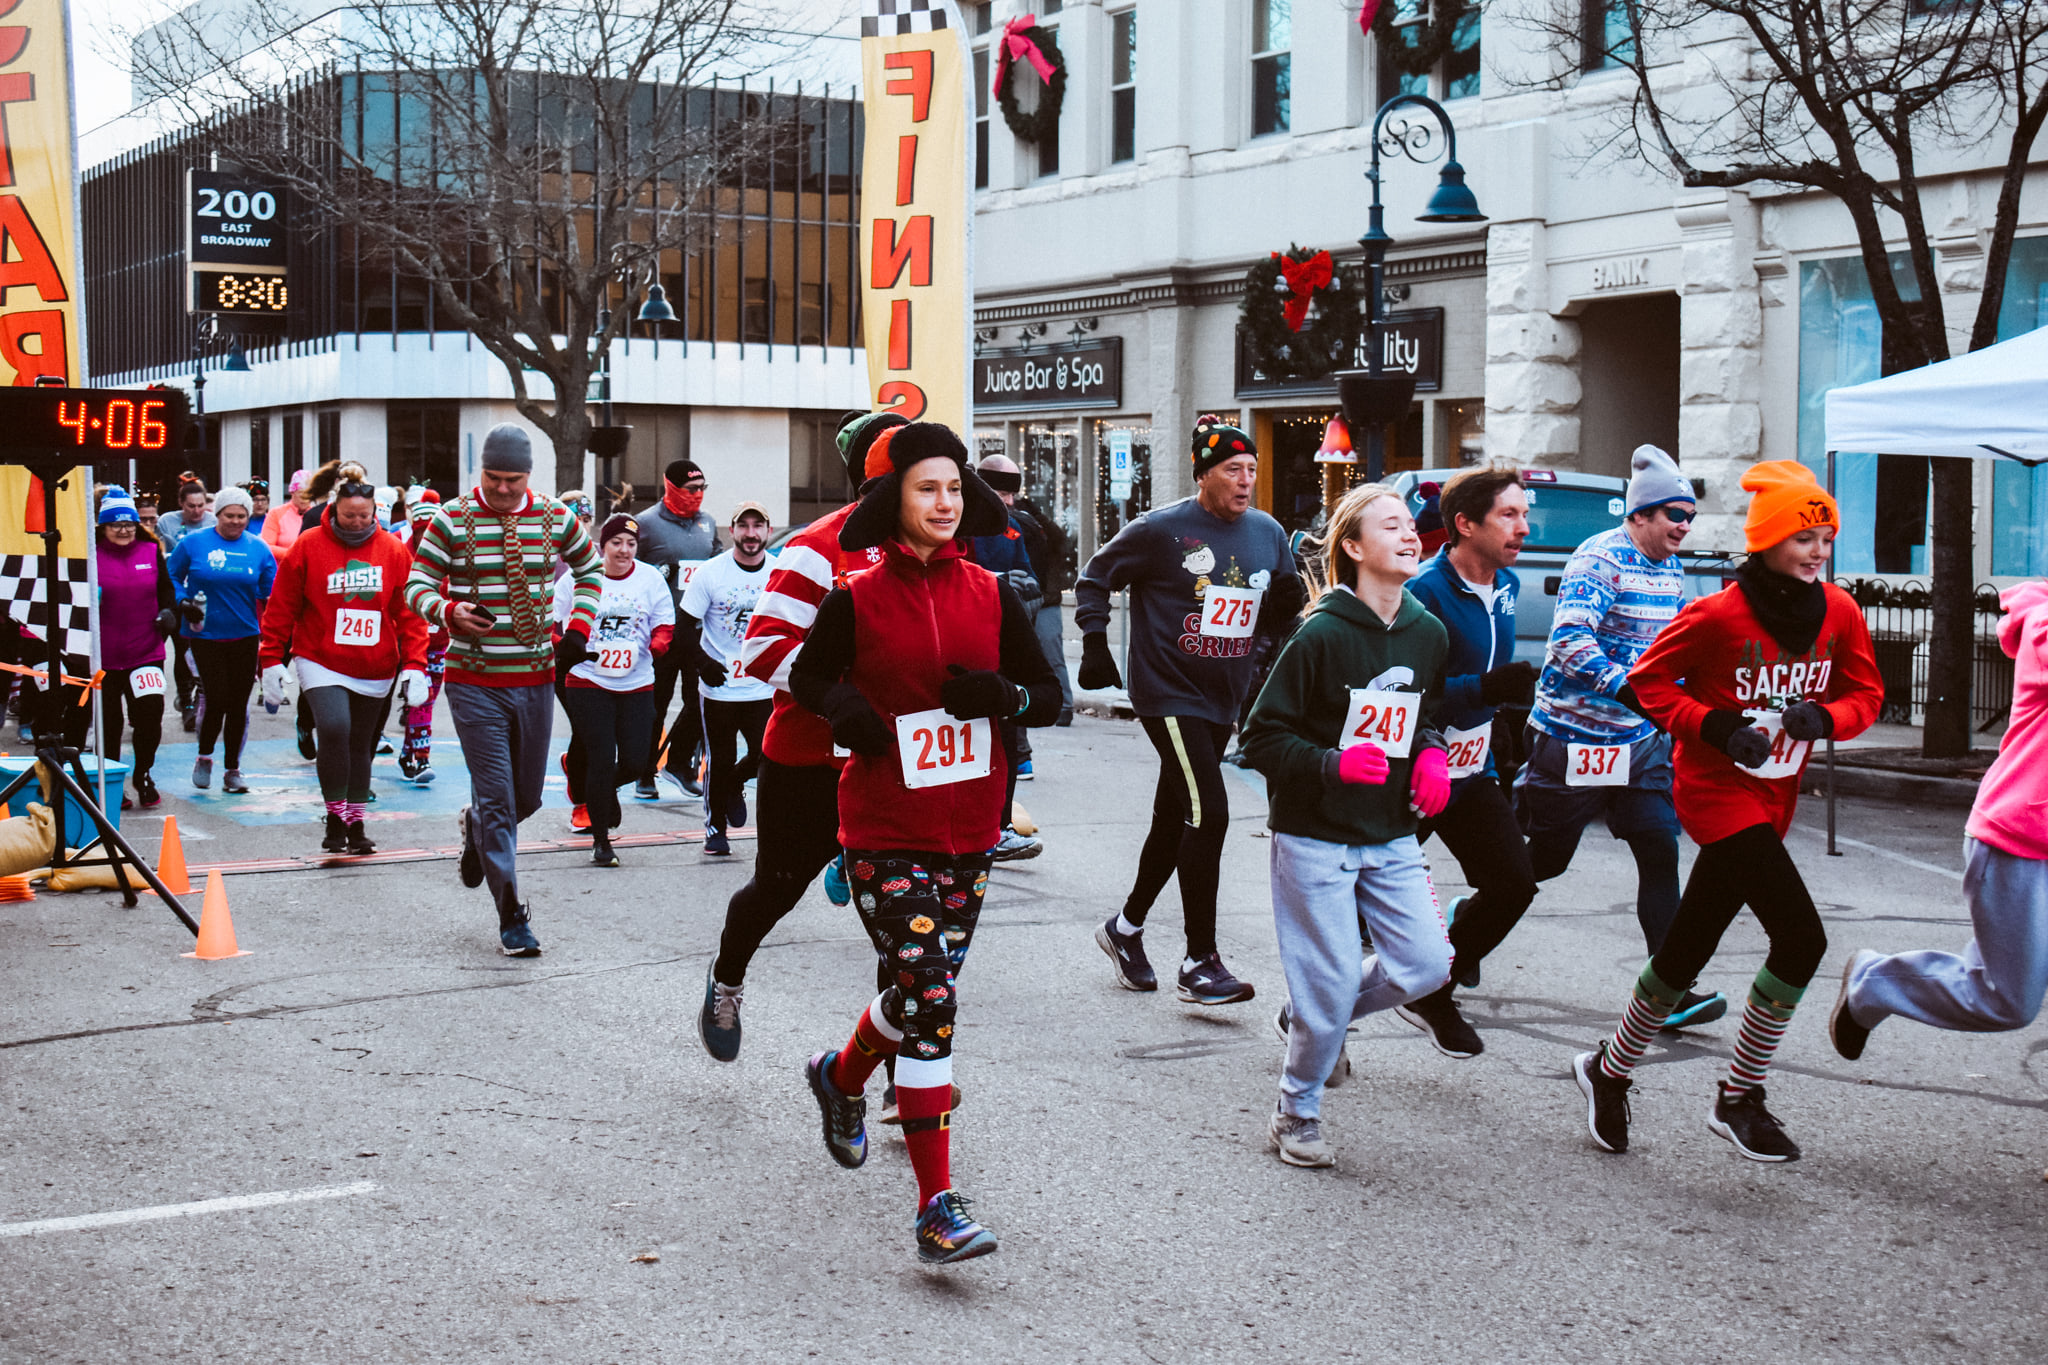 Runners at the Jingle All the Way 5k